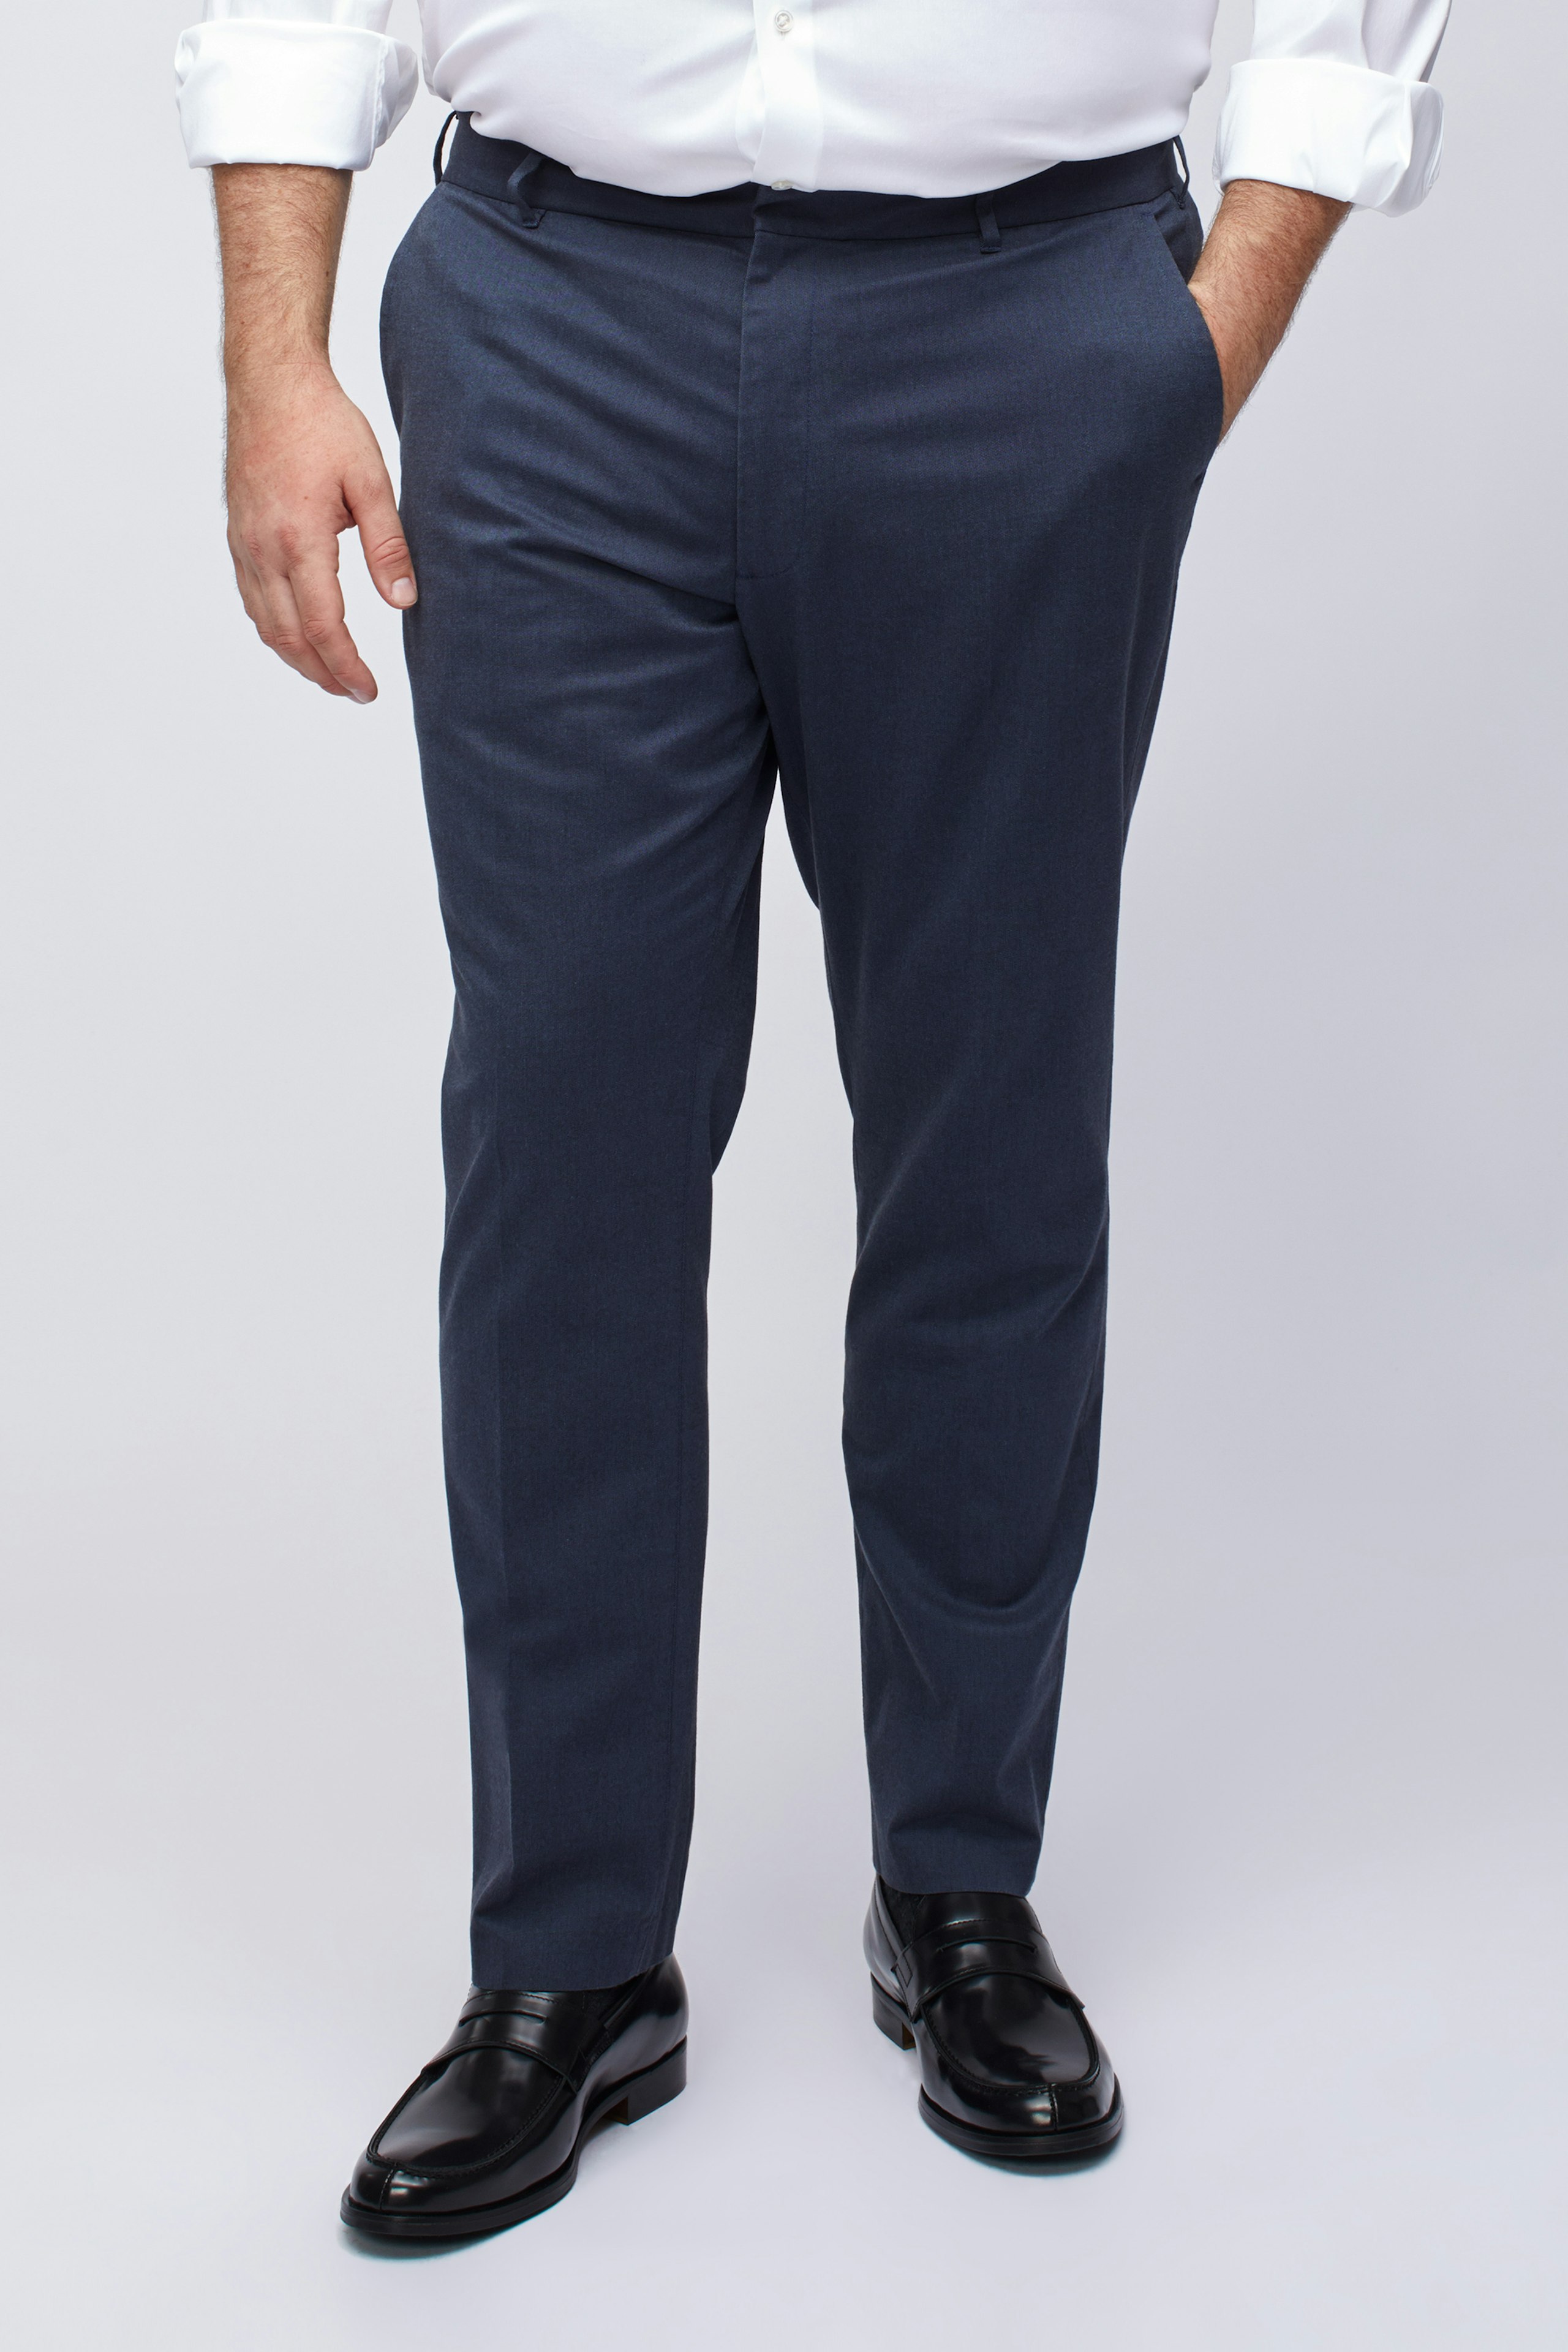 Stretch Weekday Warrior Dress Pants Extended Sizes